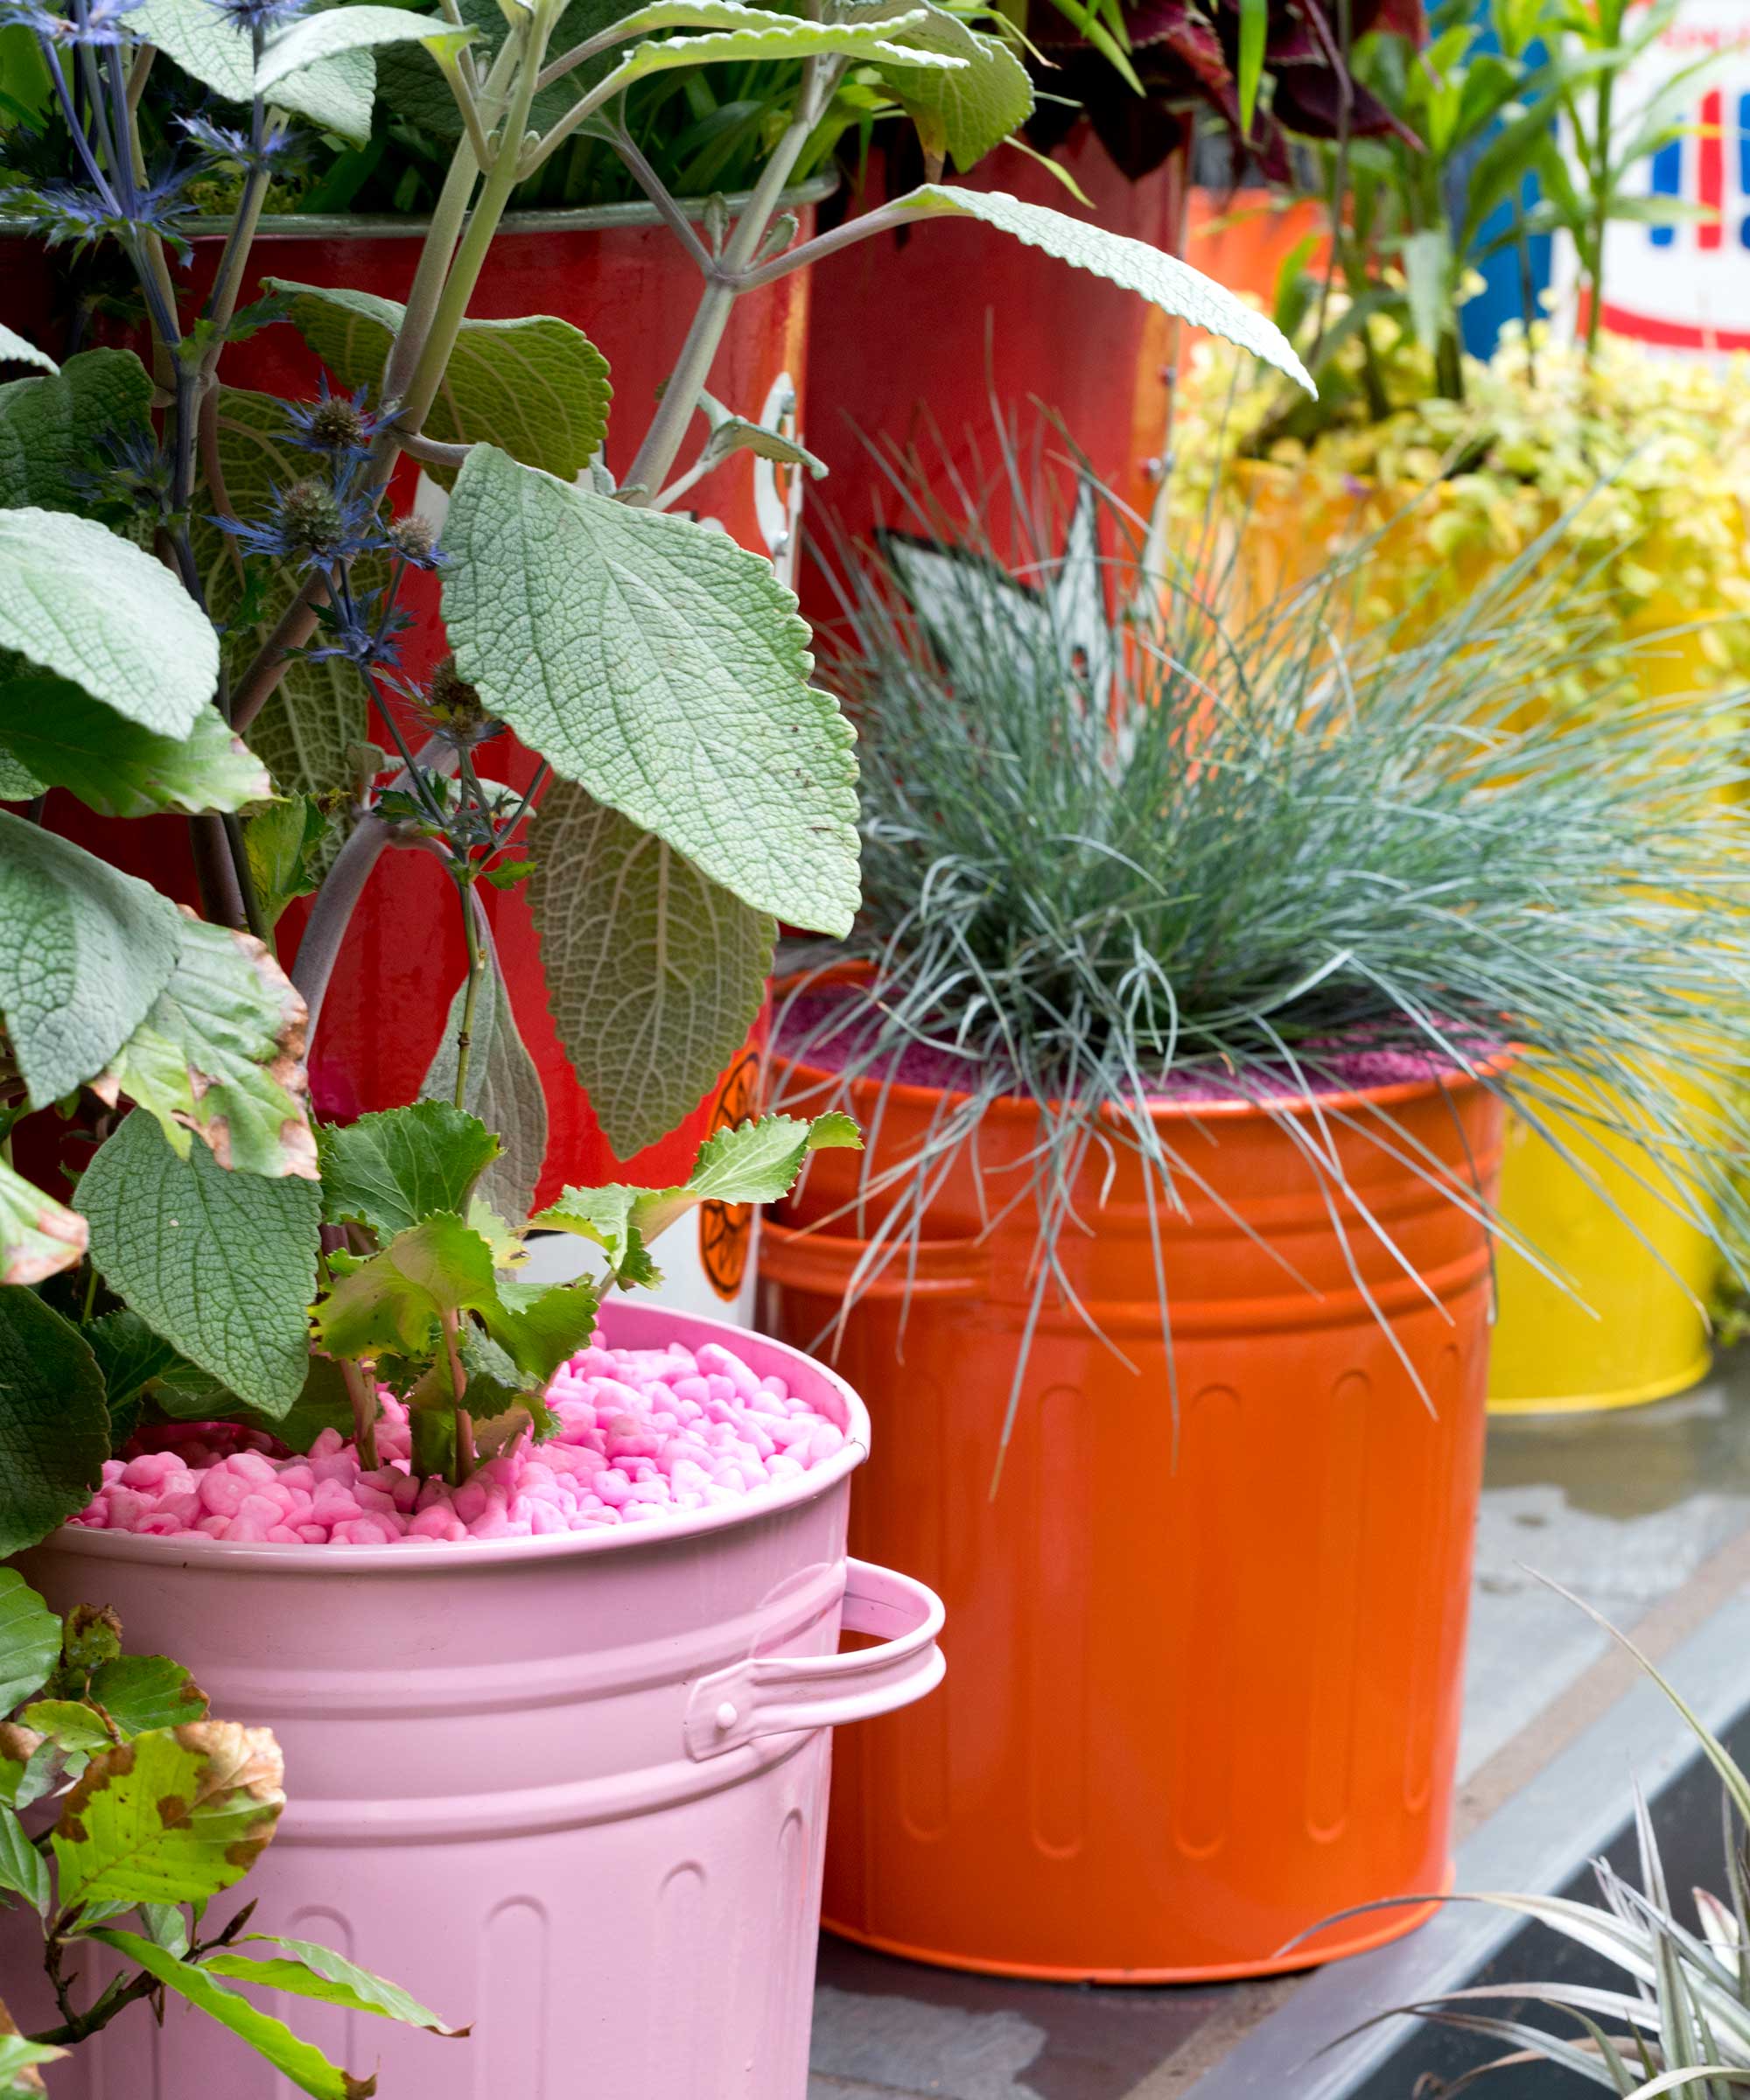 colorful gravel mulch in pots at the 'Pop Street Garden' by John McPherson at Chelsea flower show 2021